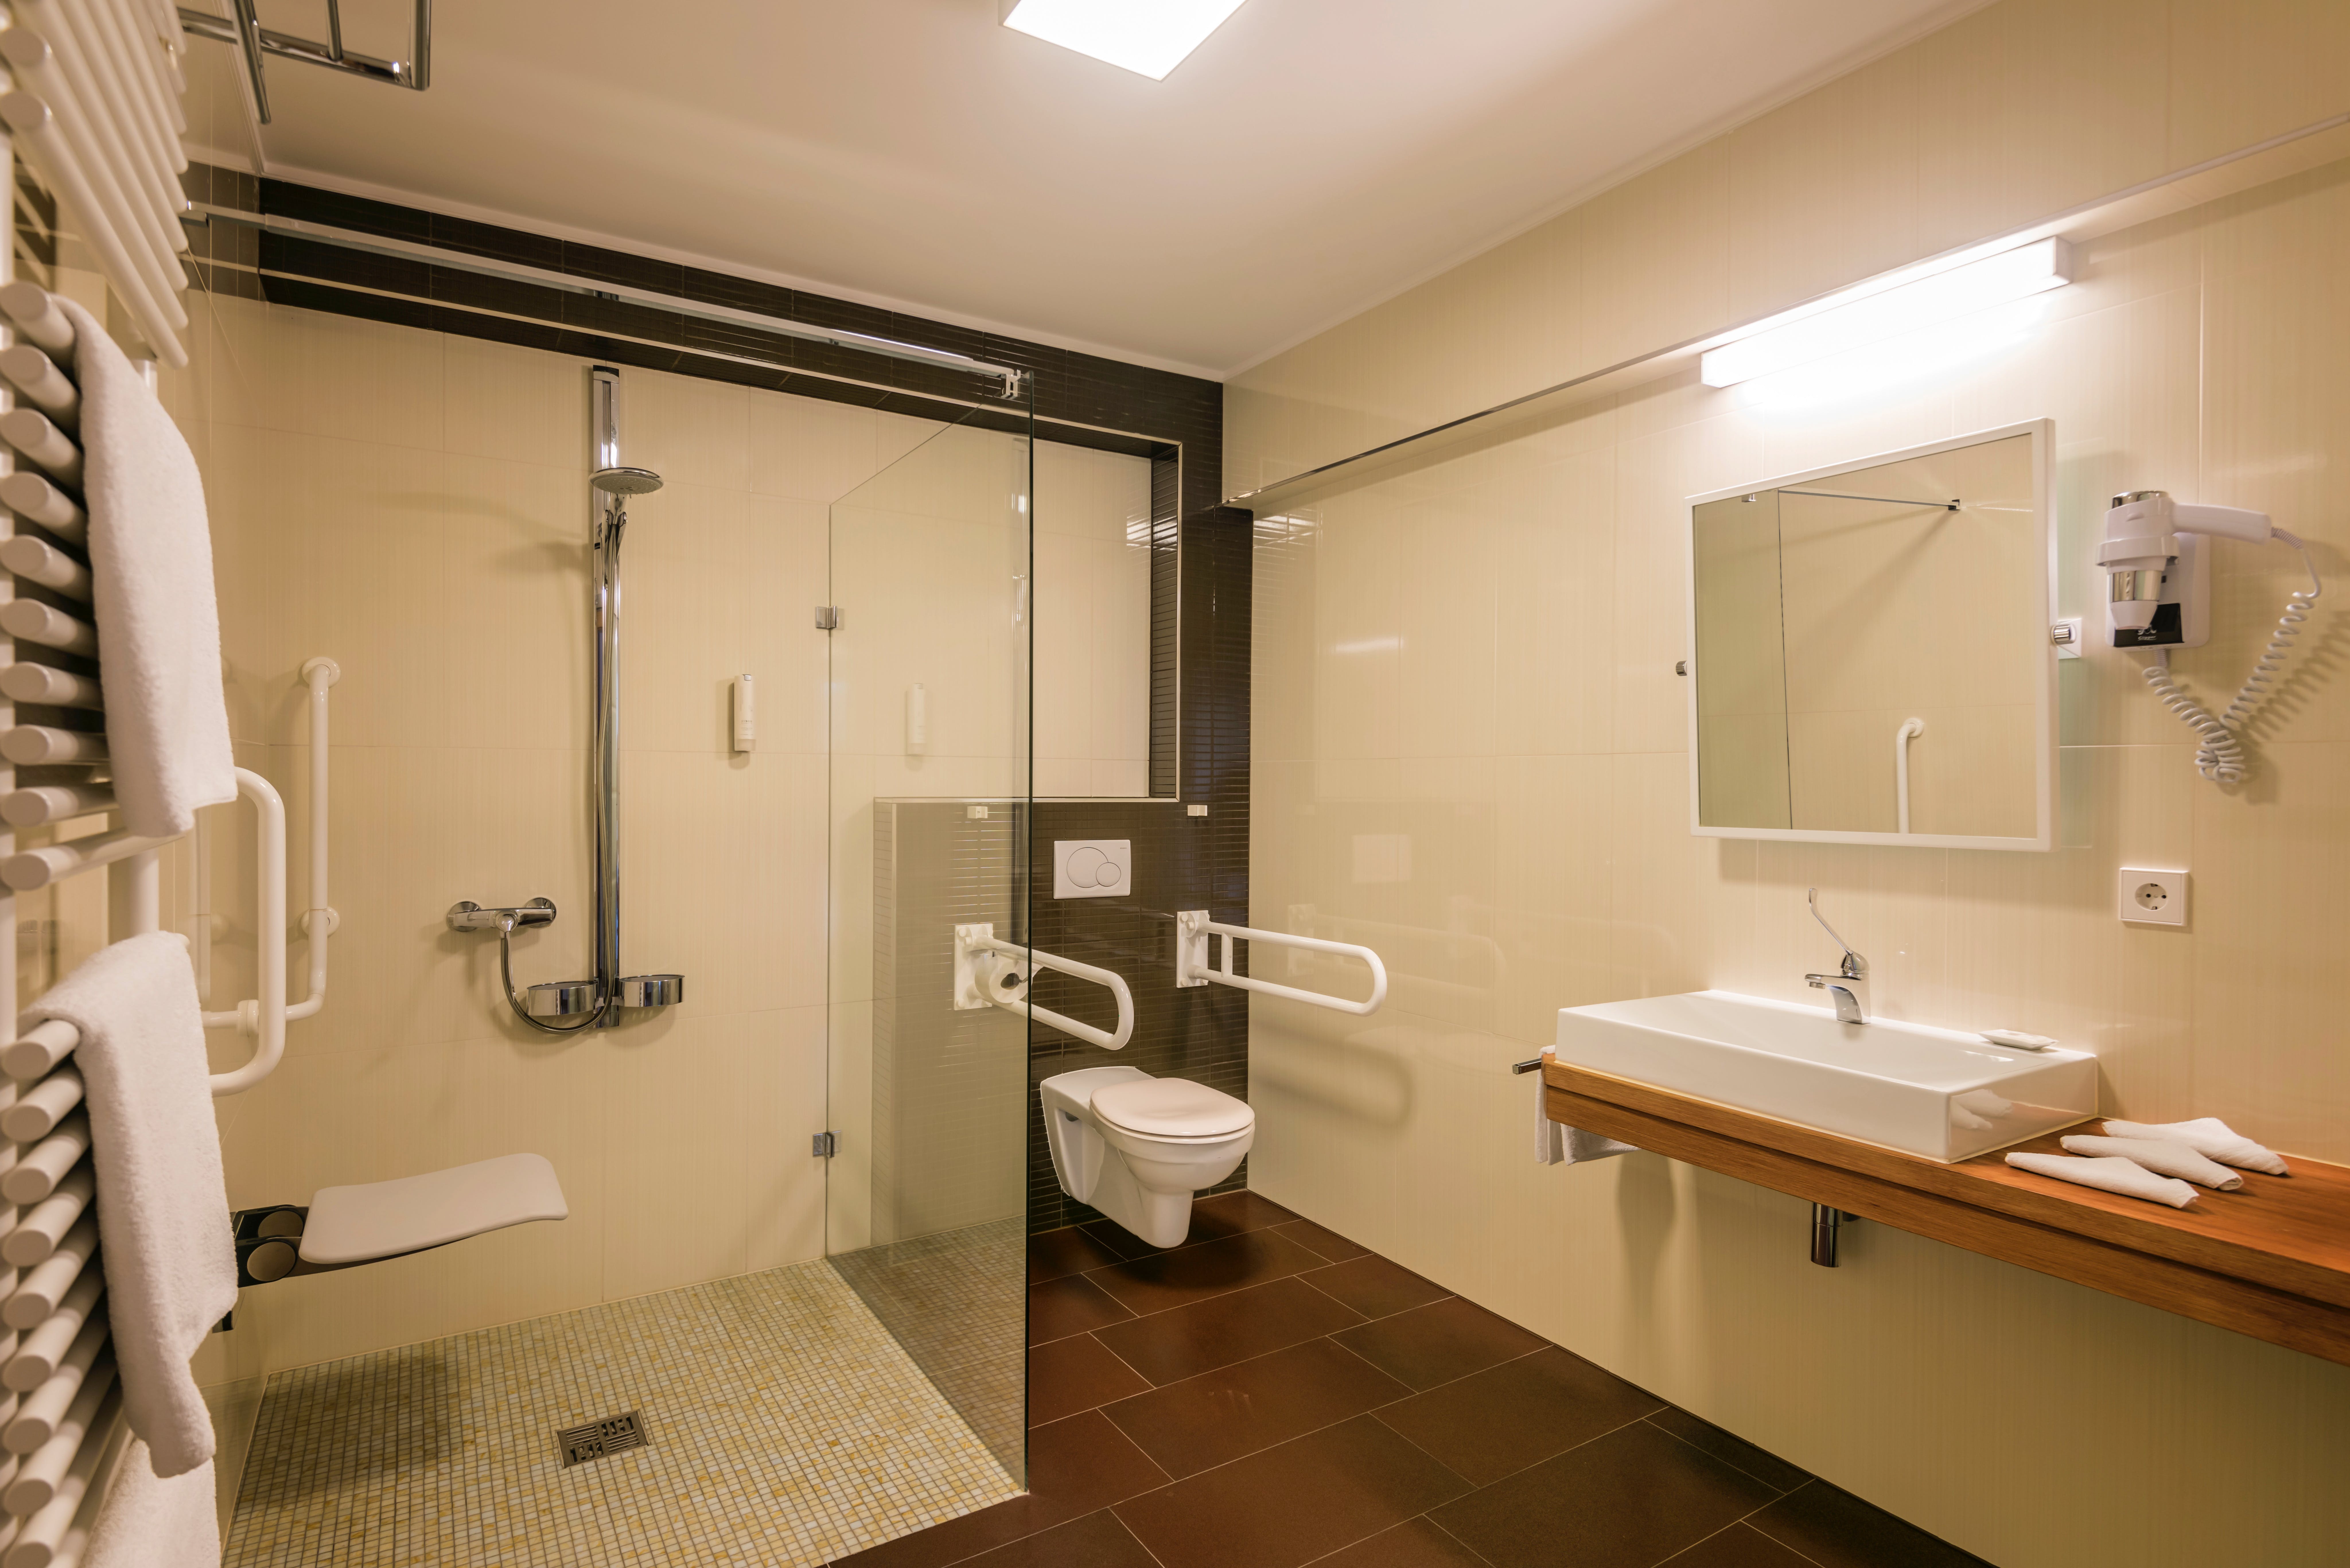 Bathroom with shower, mirror, and toilet